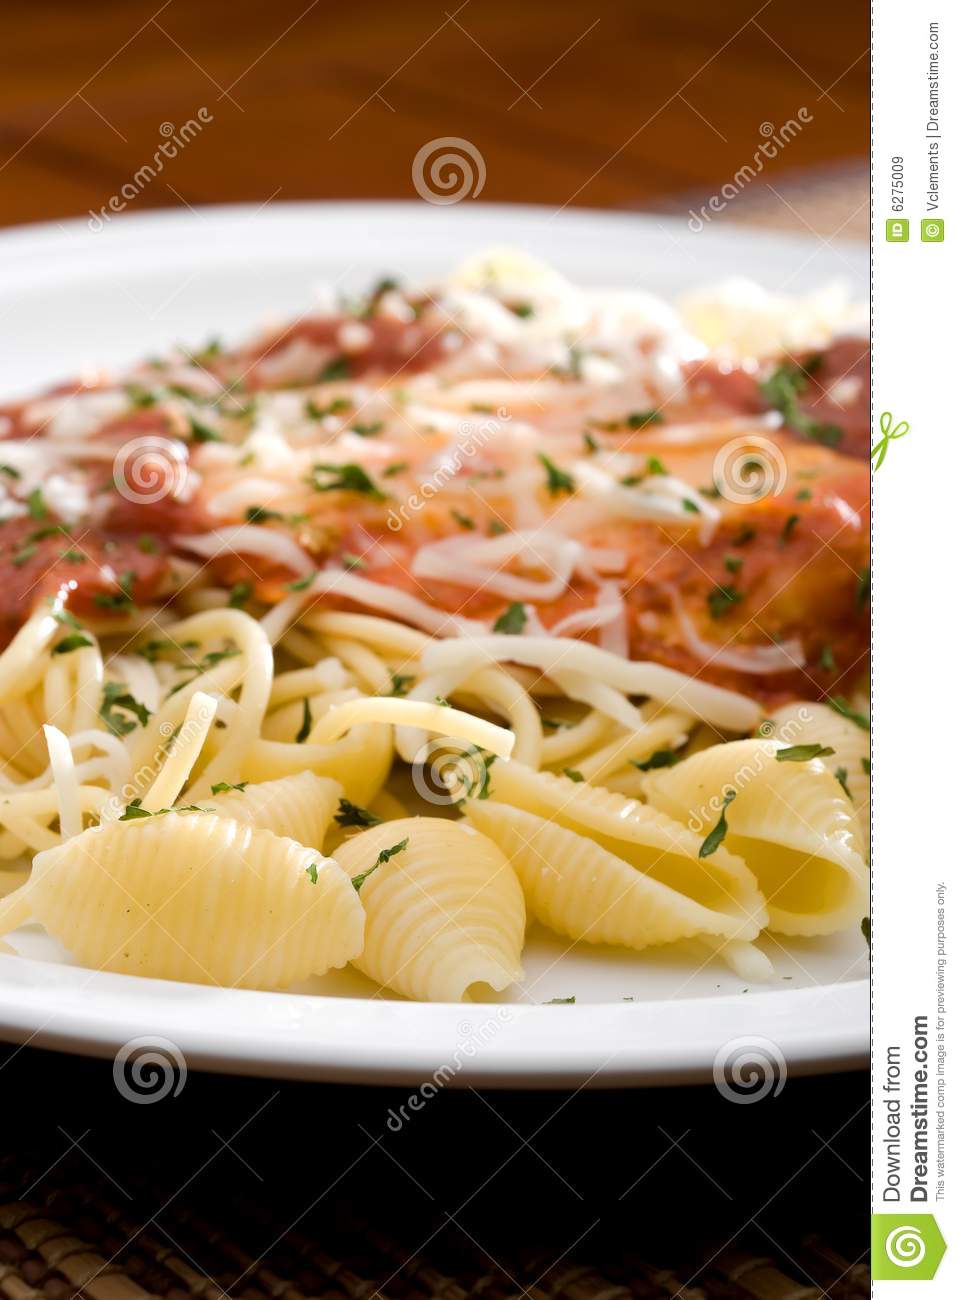 Chicken Parmesan And Noodles Royalty Free Stock Images   Image